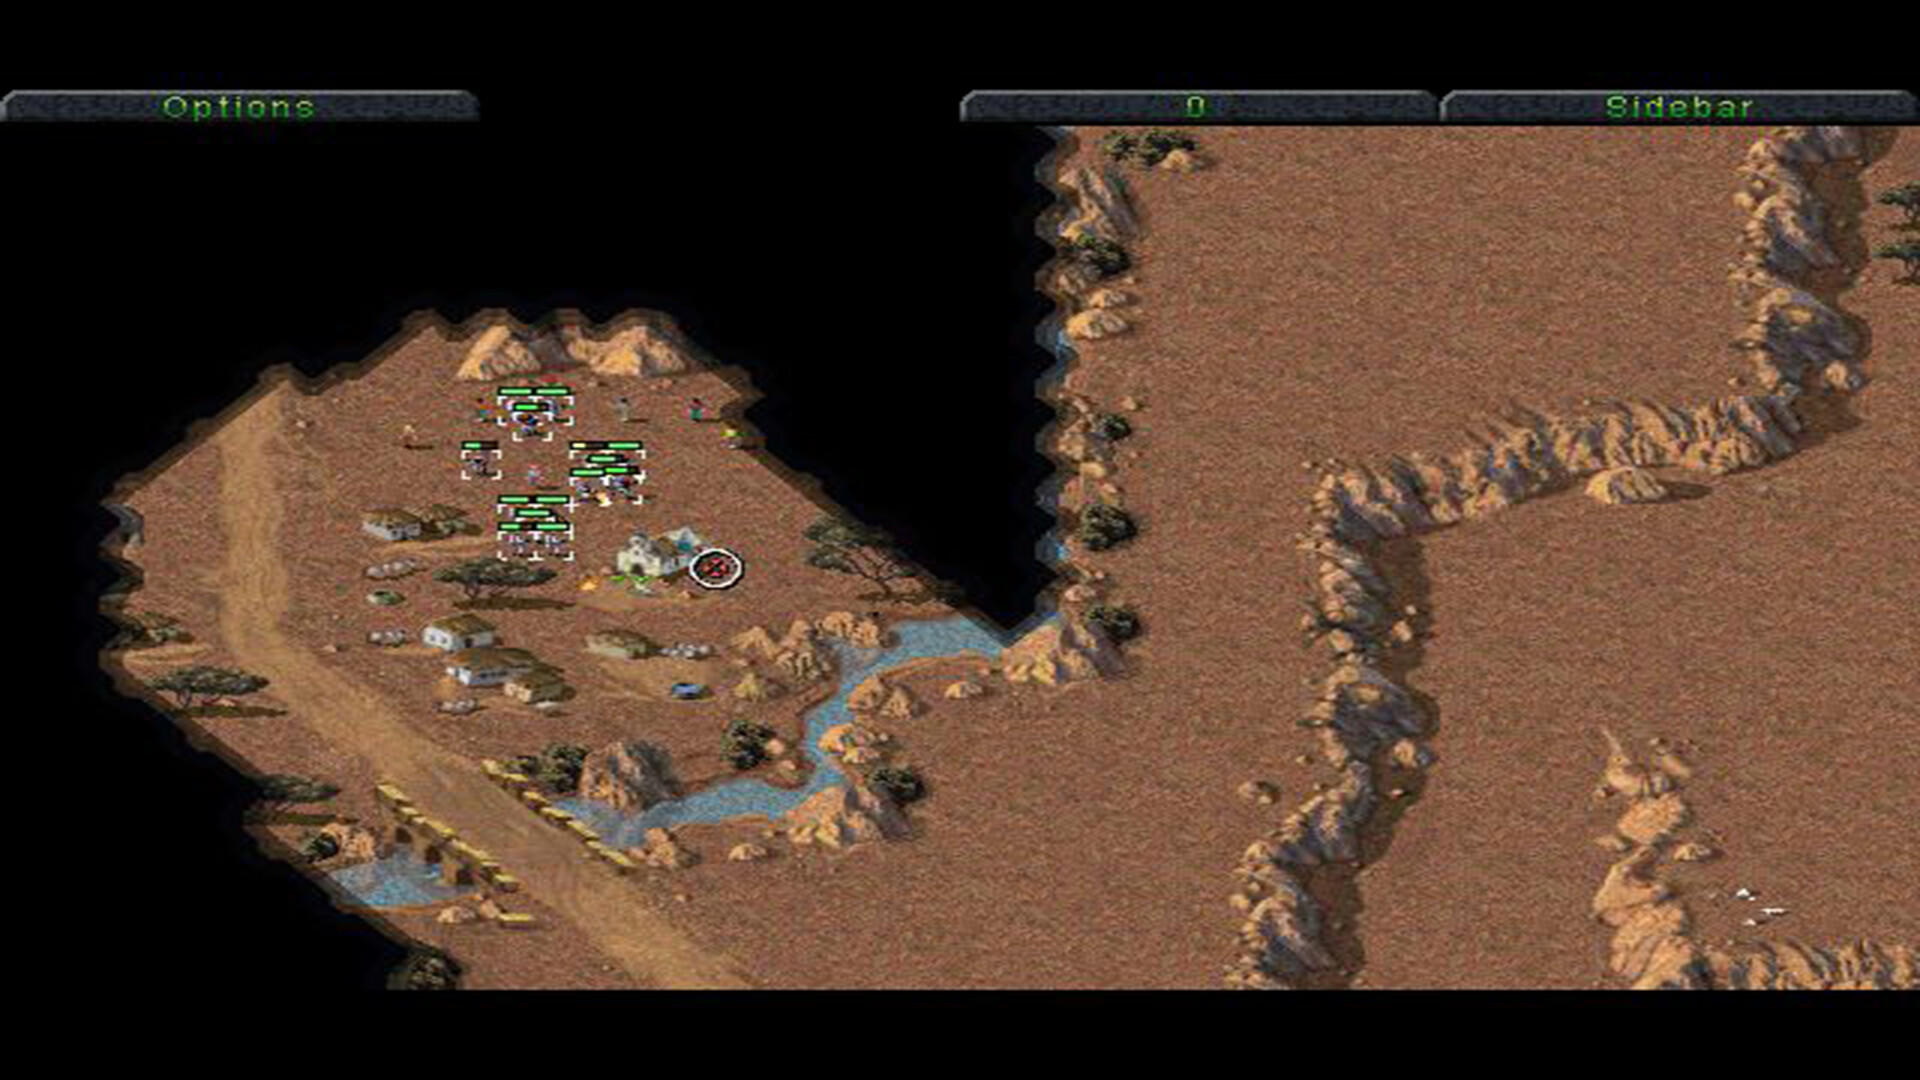 Command & Conquer™ and The Covert Operations™ screenshot game